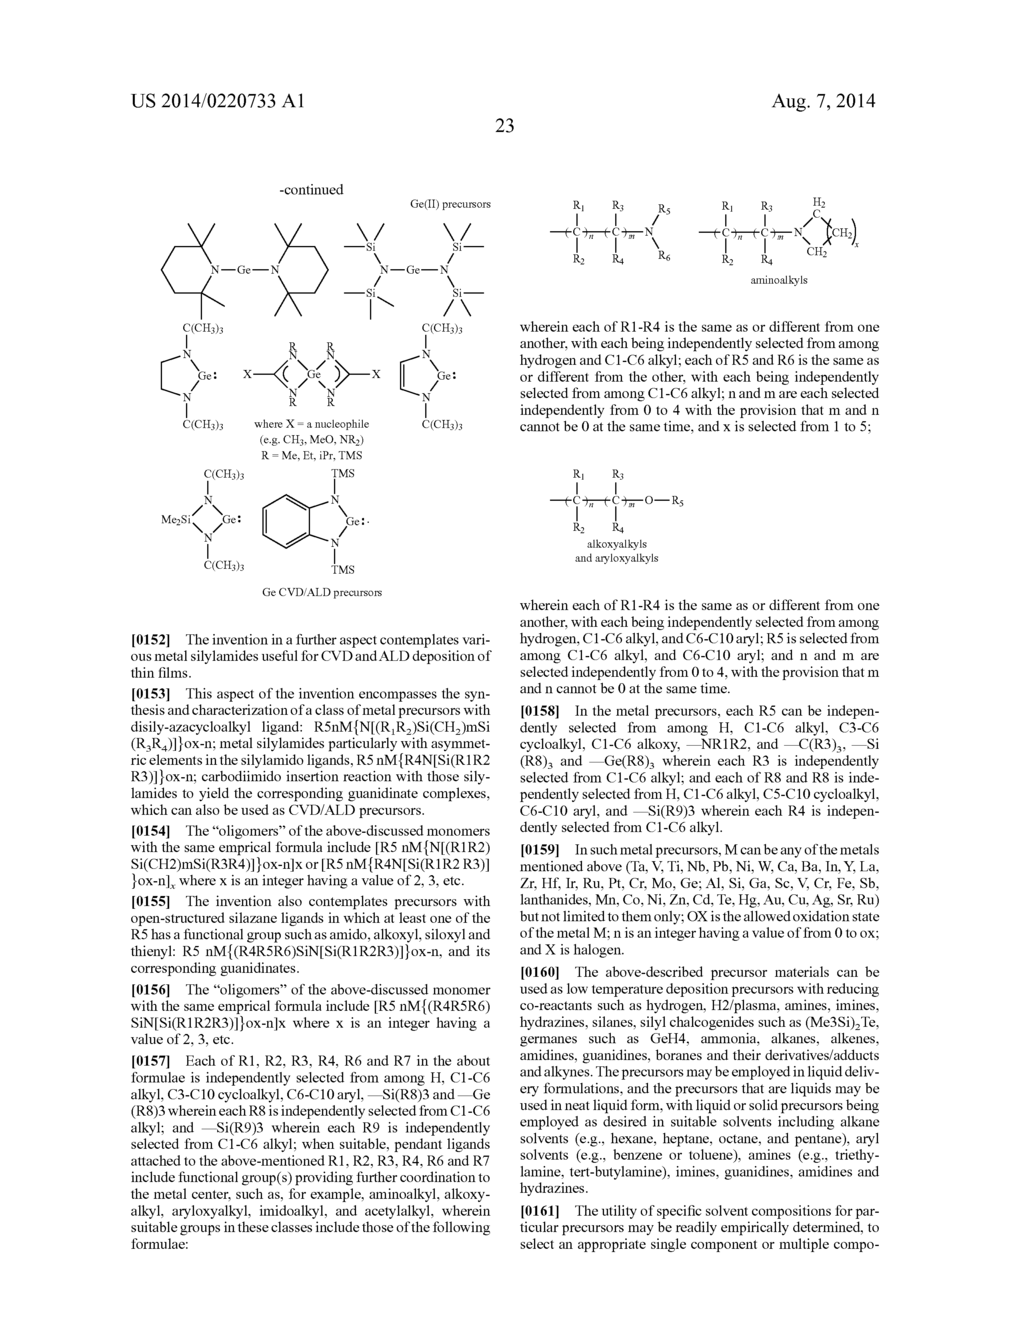 ANTIMONY AND GERMANIUM COMPLEXES USEFUL FOR CVD/ALD OF METAL THIN FILMS - diagram, schematic, and image 29